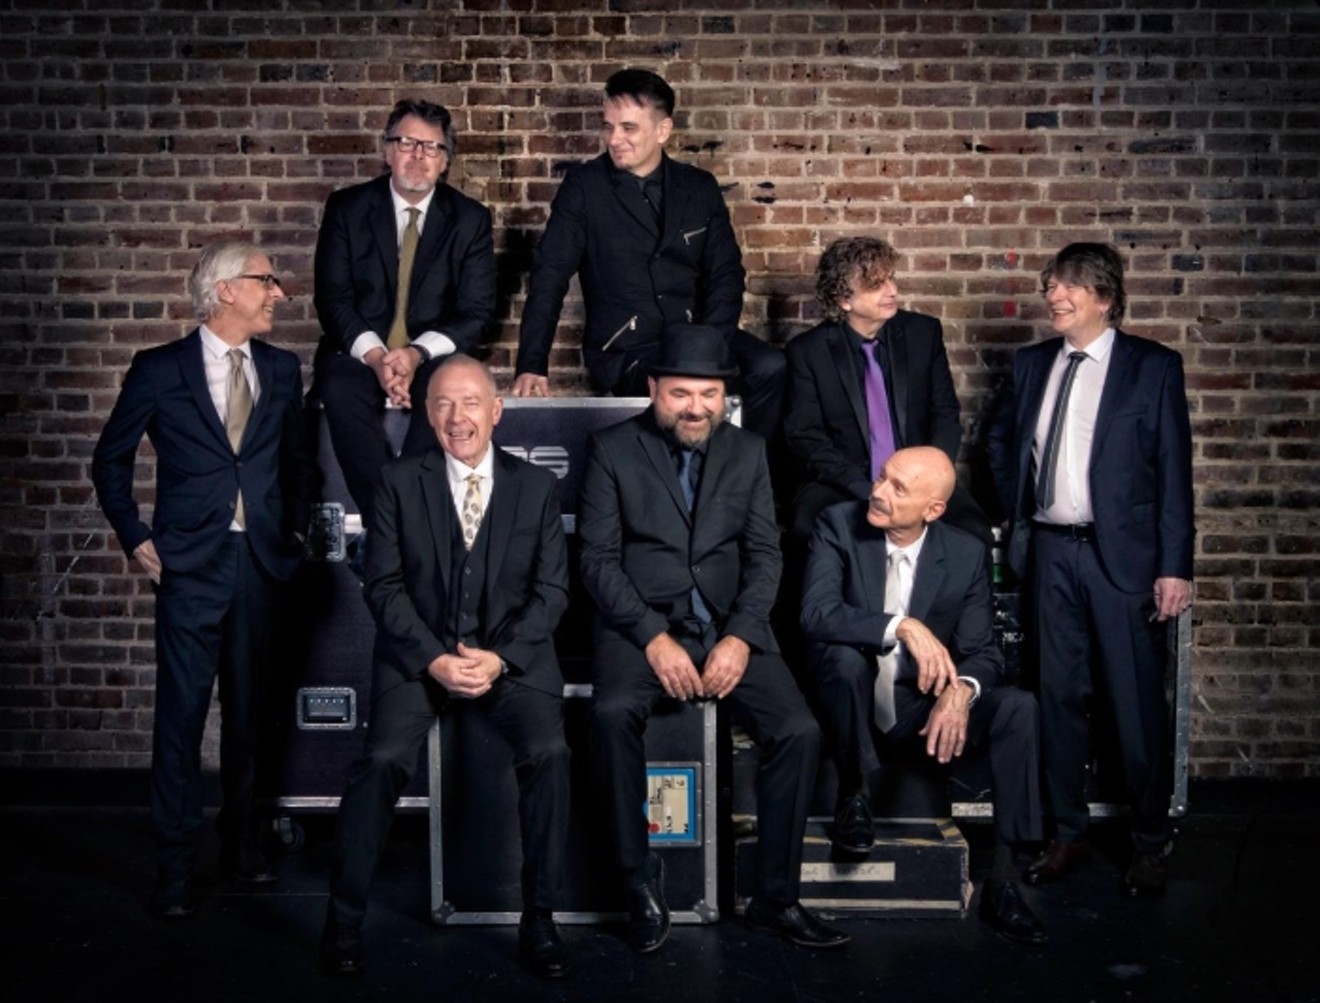 King Crimson brings its fiftieth-anniversary tour to the Paramount Theatre on Sunday, September 8.